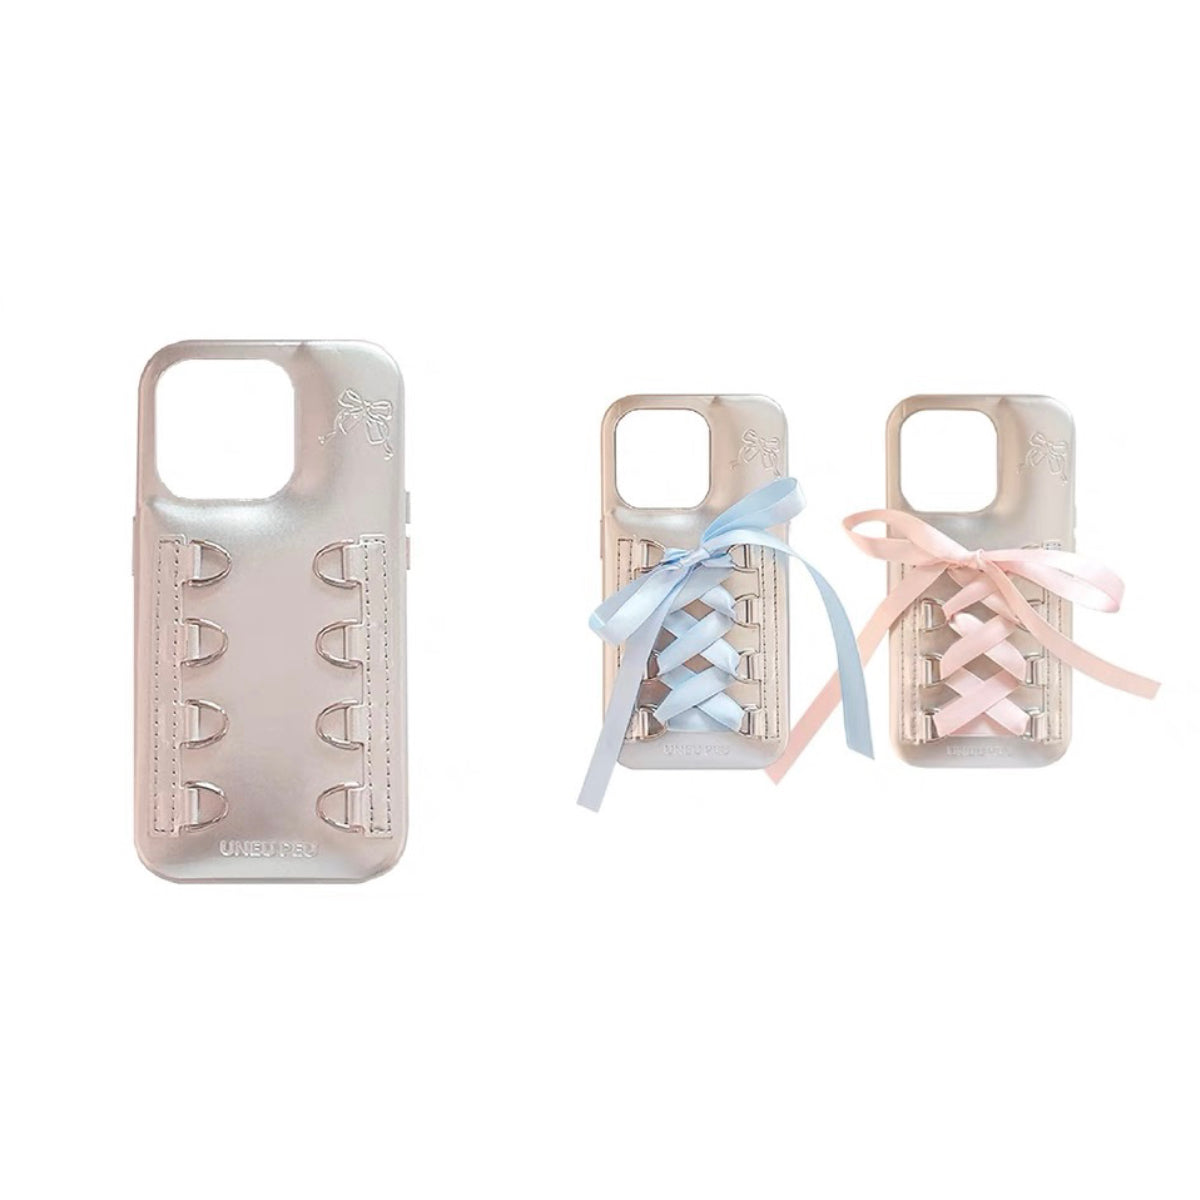 UNEUPEU .Ballet Girl  Silver Pink Ballet Style iPhone Case All-Inclusive